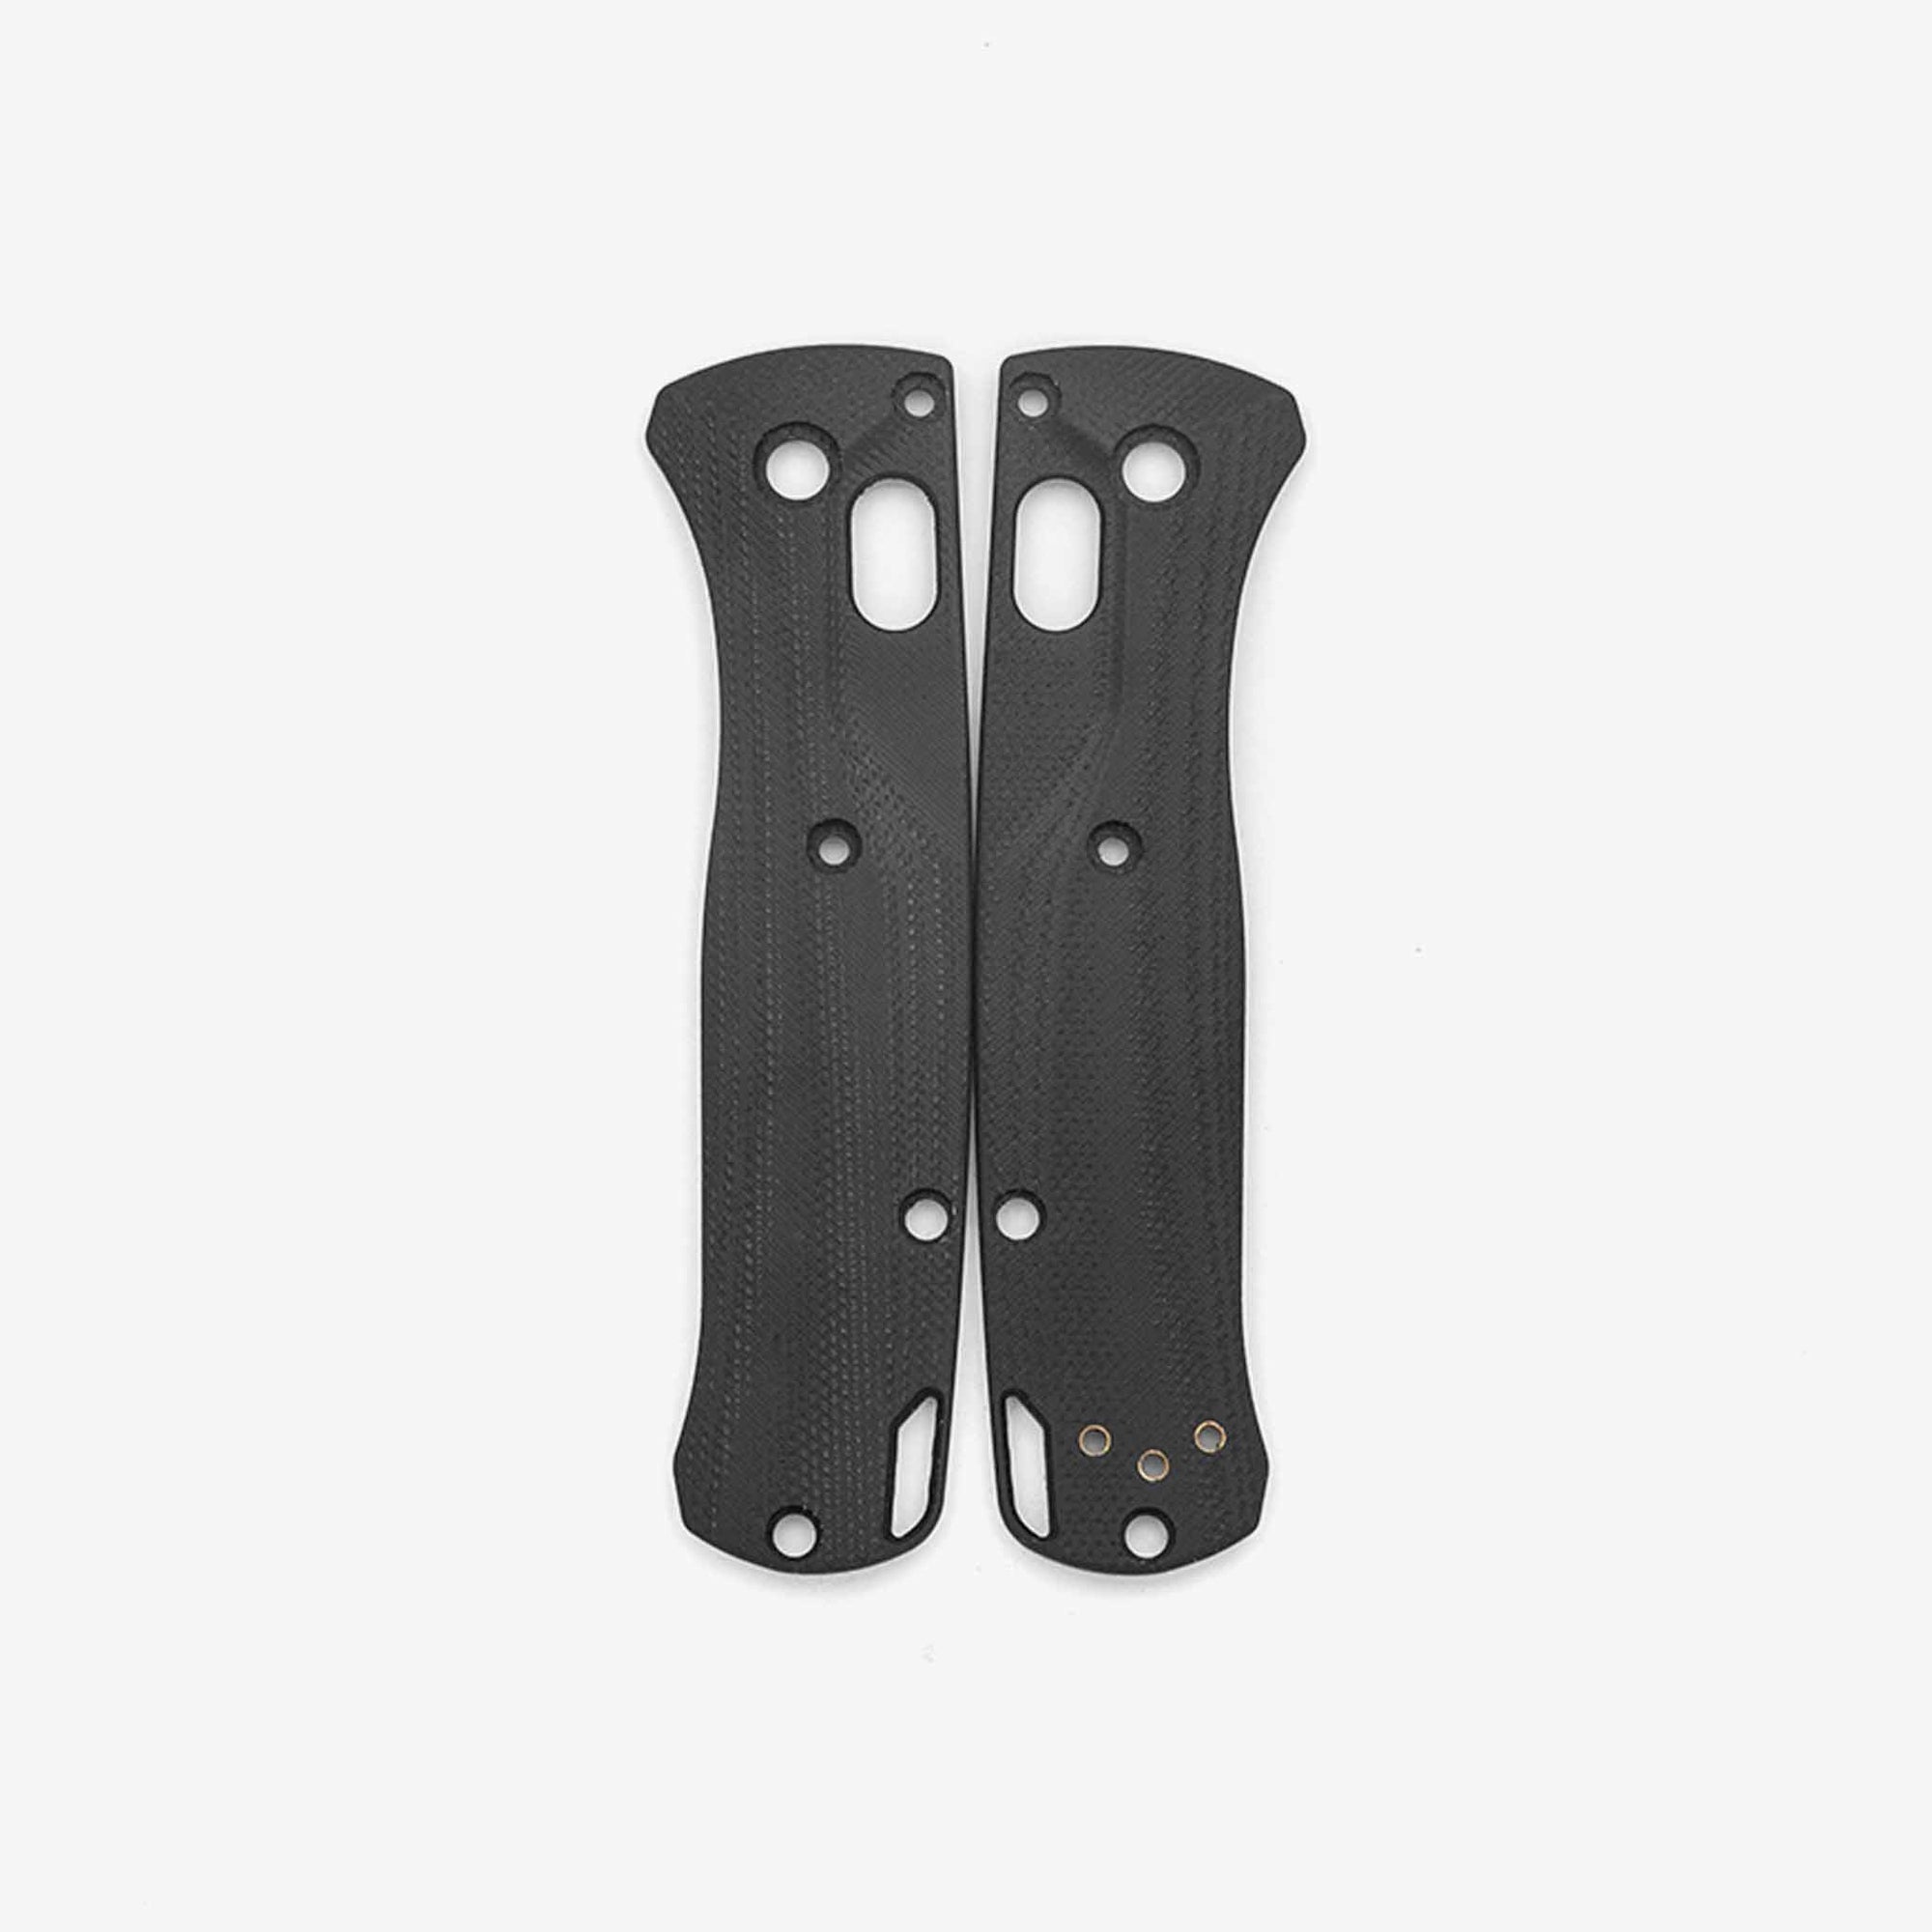 Black Crossfade G-10 scales for the Benchmade Mini Bugout.